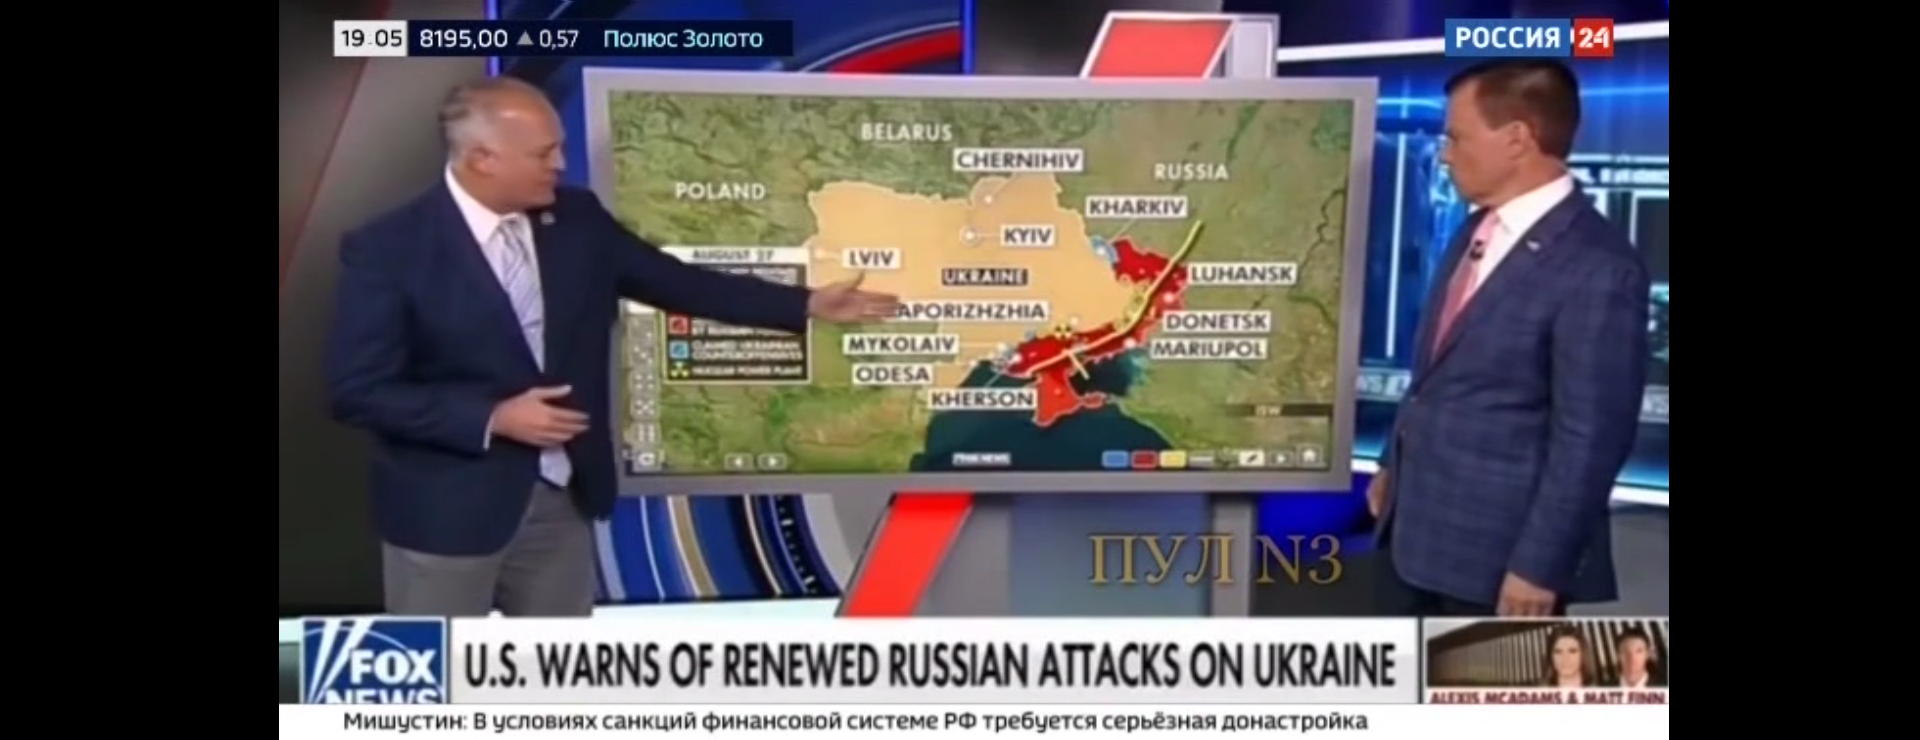 Experiments In Scanning Russian Television News For Fox News Clips